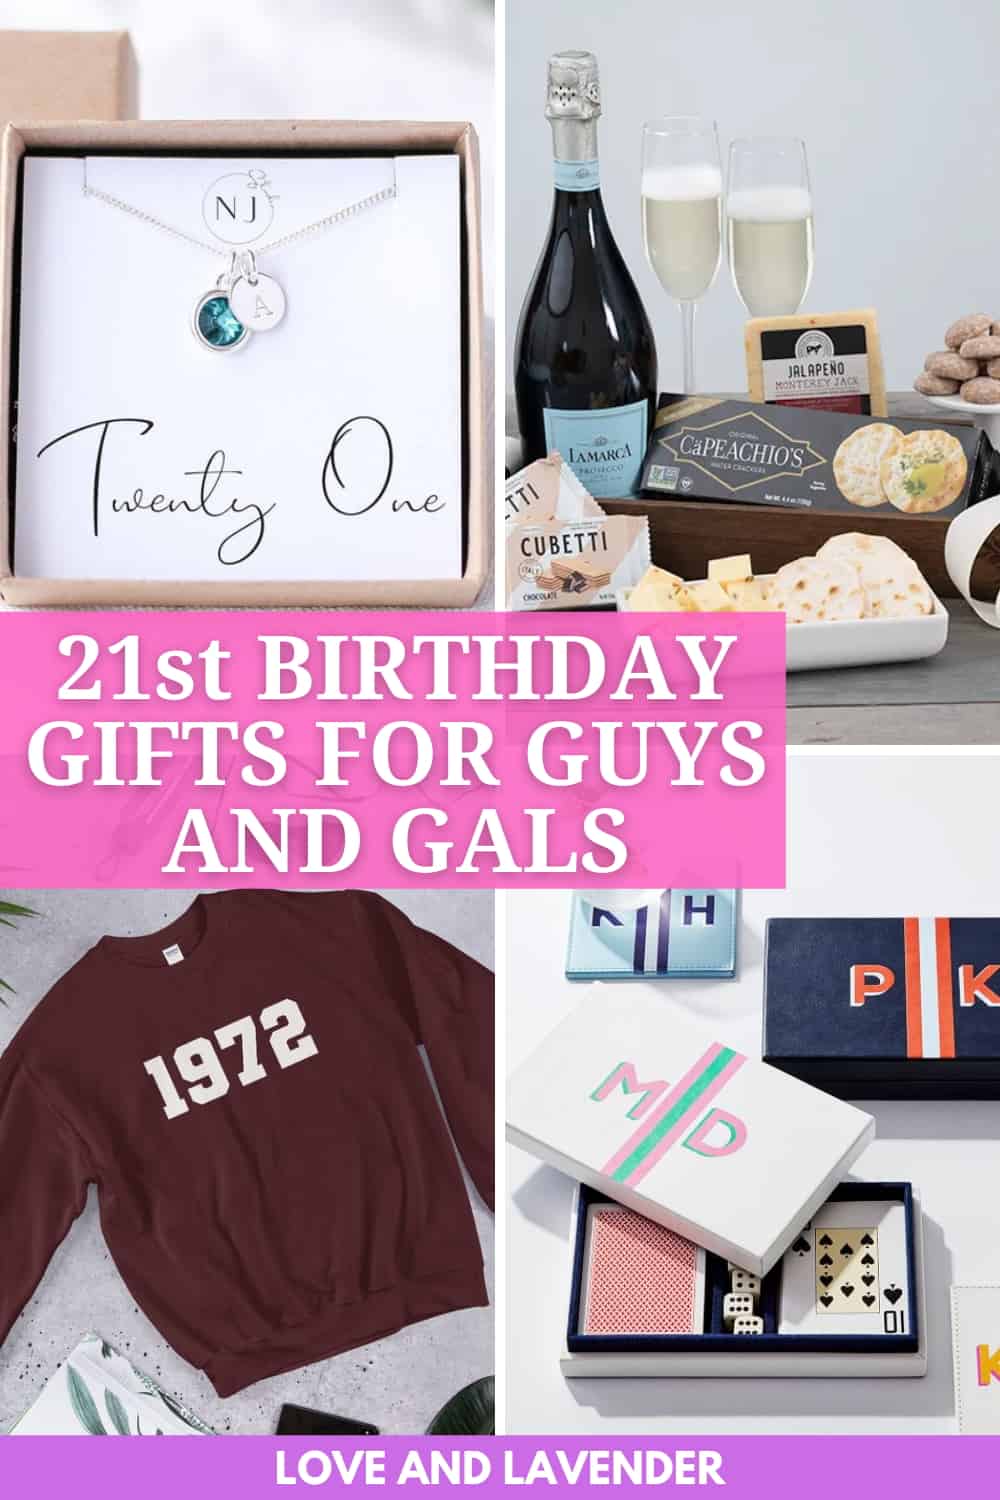 21st Birthday Gifts to Reach 11/10 on the Awesomeness Scale - Love